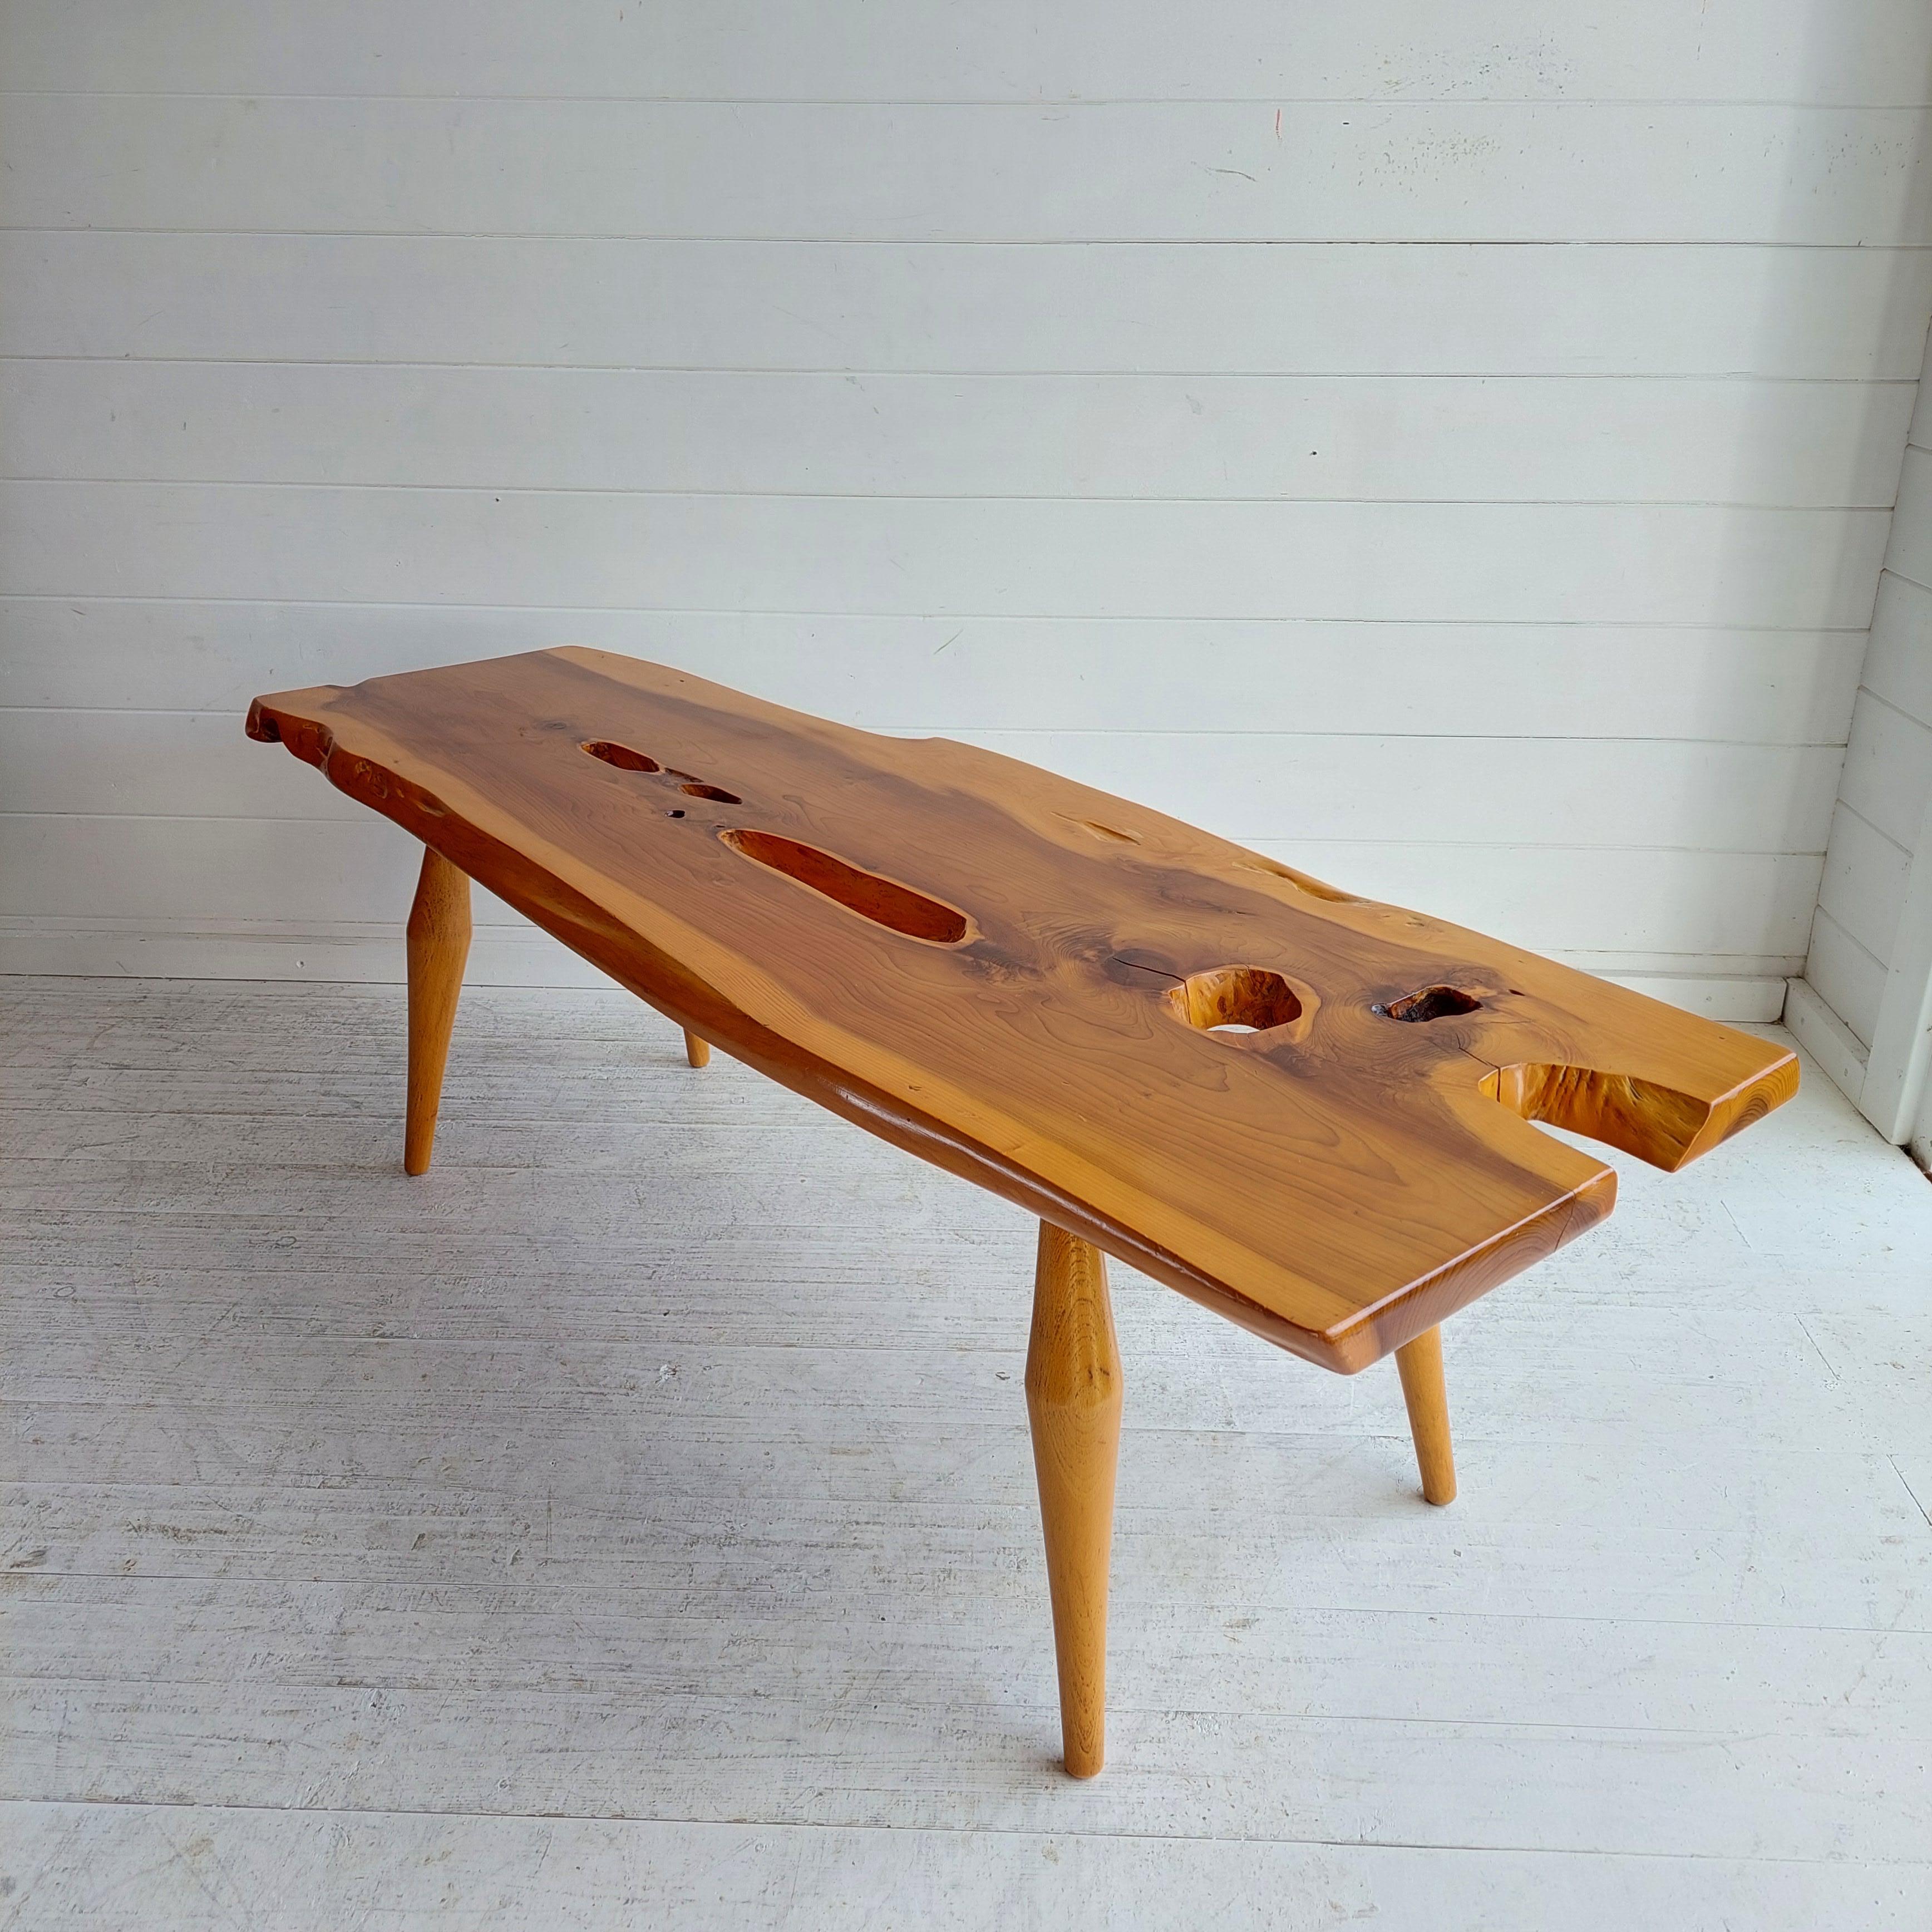 Mid Century live edge organic yew wood coffee table 
Most probably by Reynolds of Ludlow, 1970s
There is no makers mark present but it is reminiscent of Reynolds of Ludlow.

The solid yew top is gorgeous with impressive contrasting colours and a